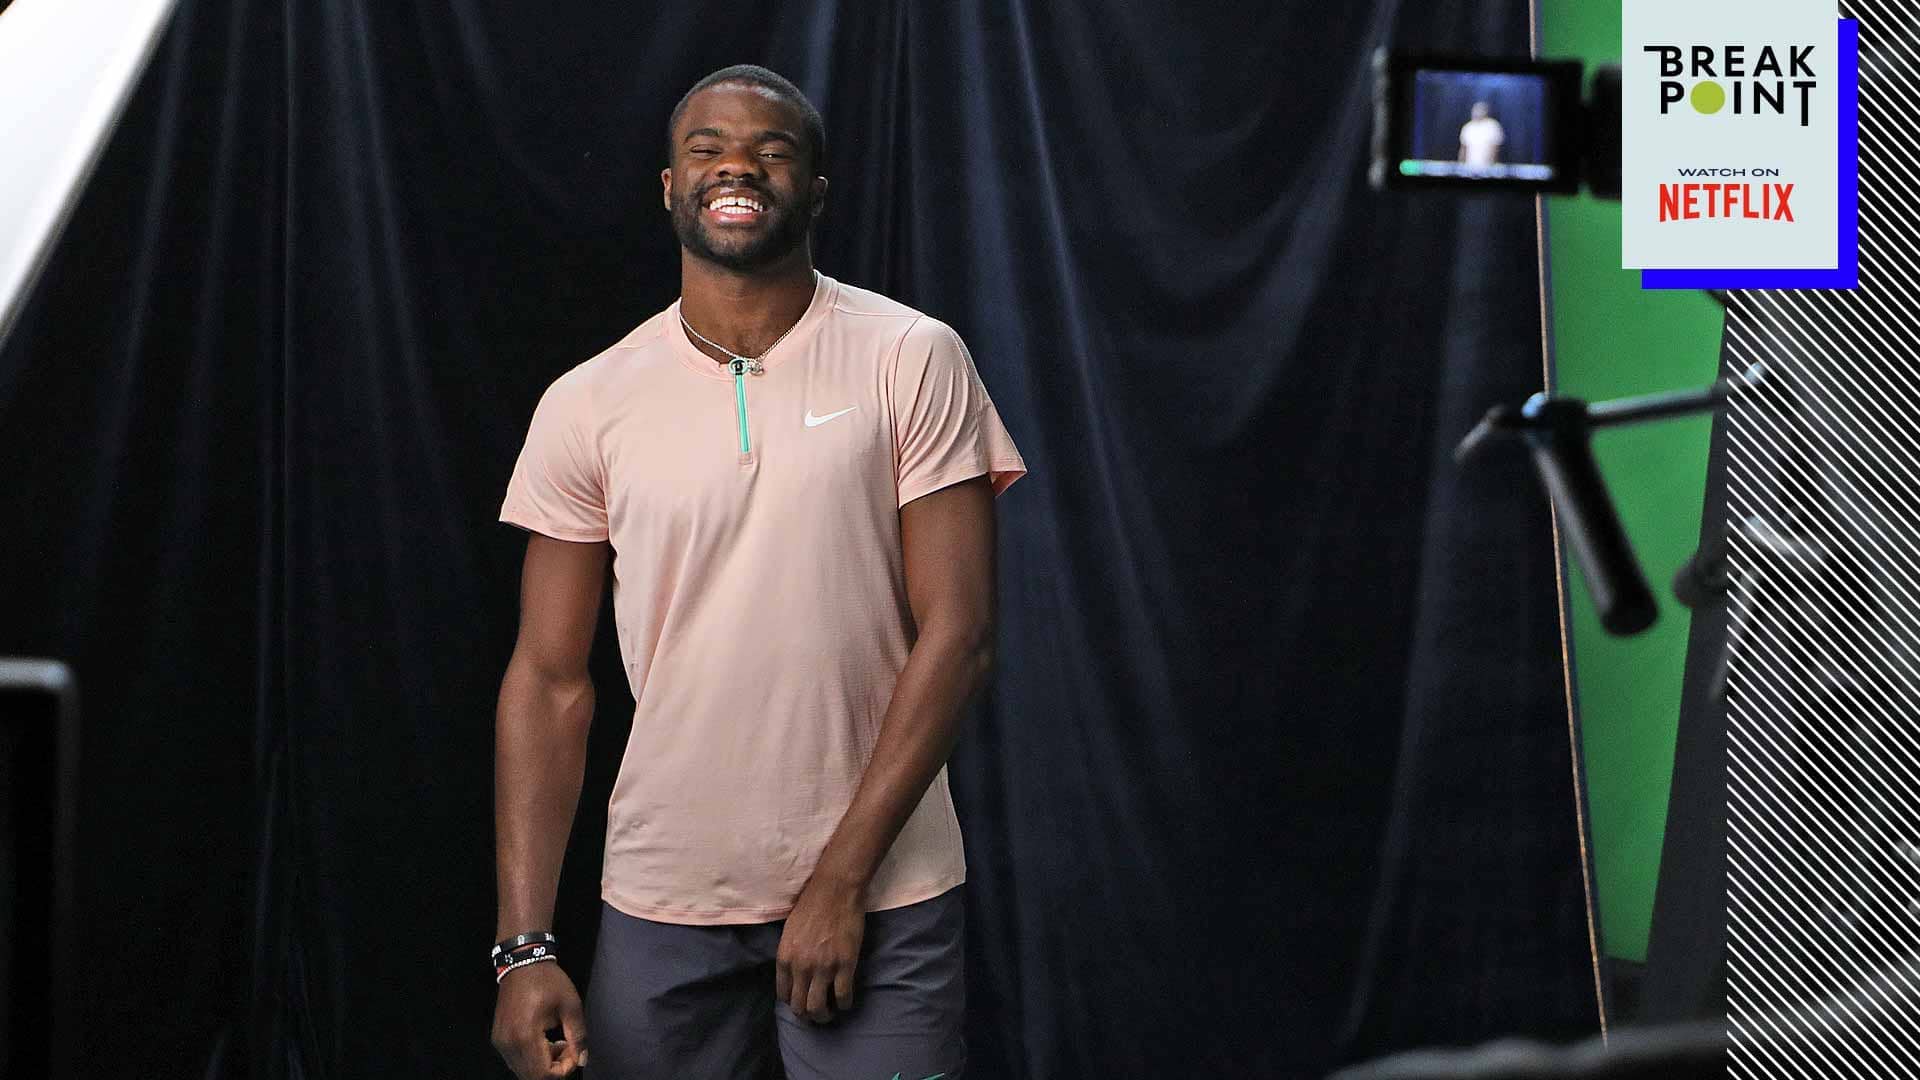 Frances Tiafoe watches Love Is Blind with his girlfriend on Netflix.